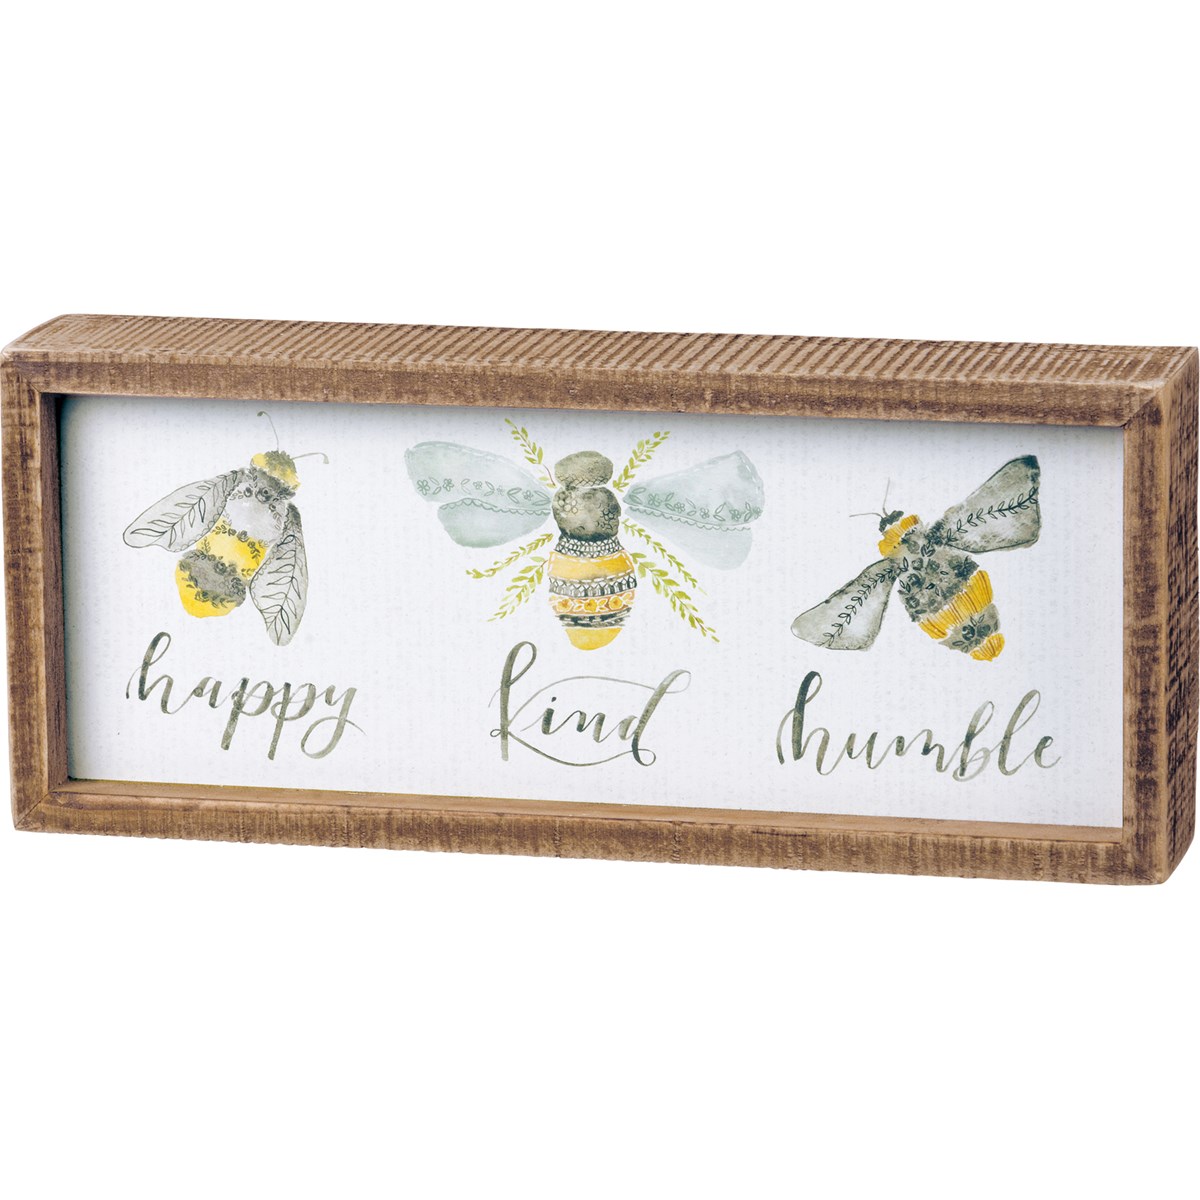 Bees Inset Box Sign - Wood, Paper